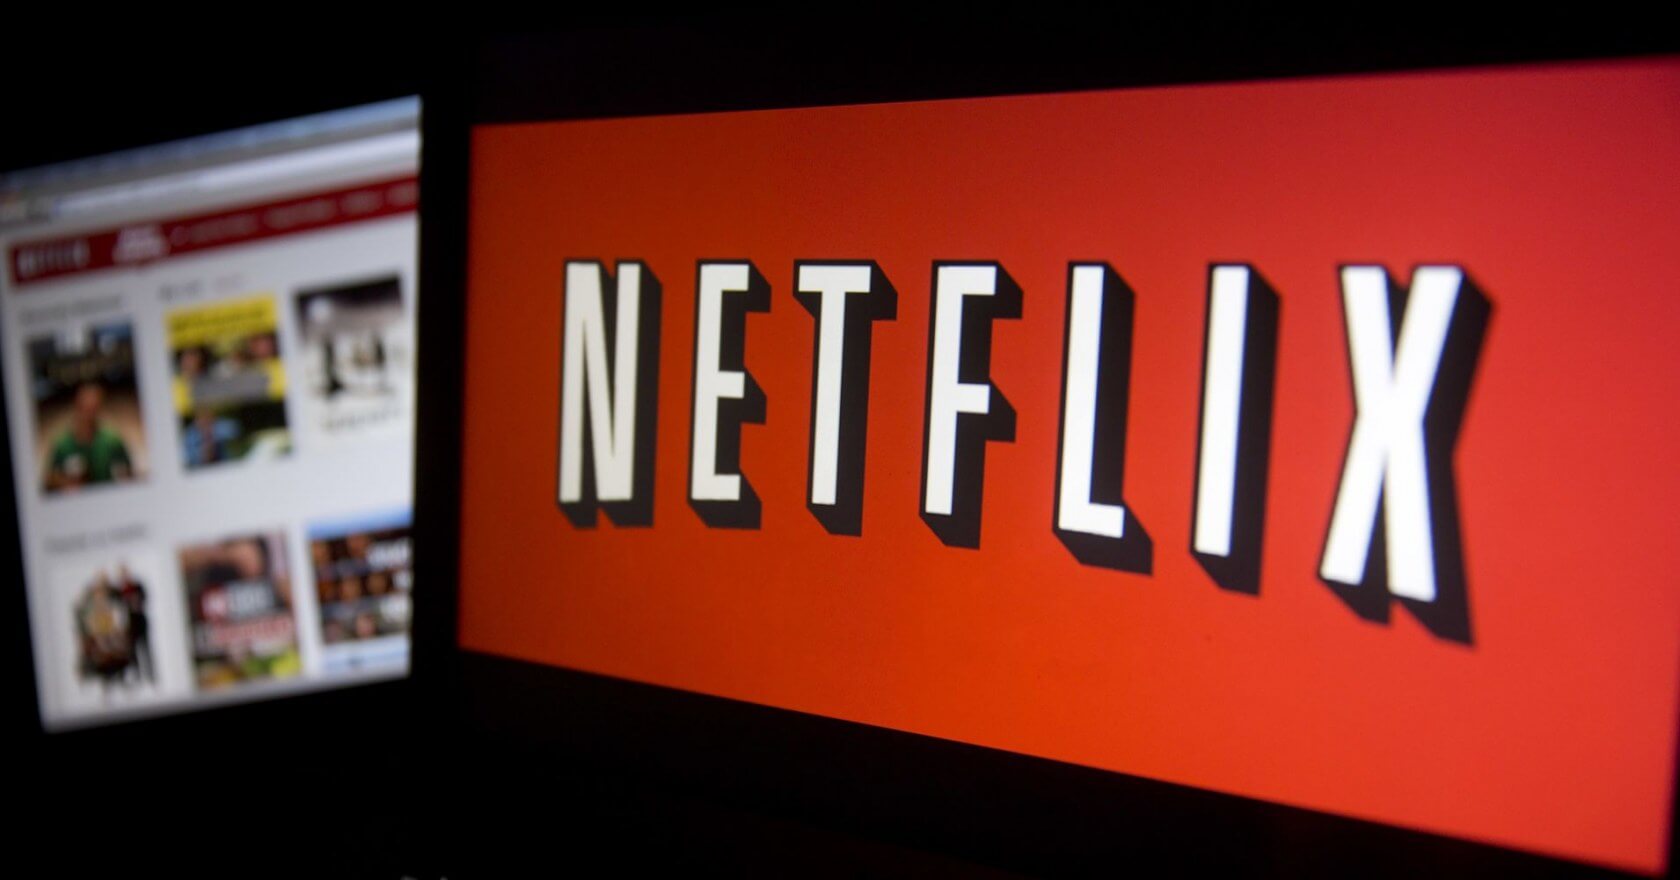 Netflix is reportedly seeking $2 billion in funding for original content production